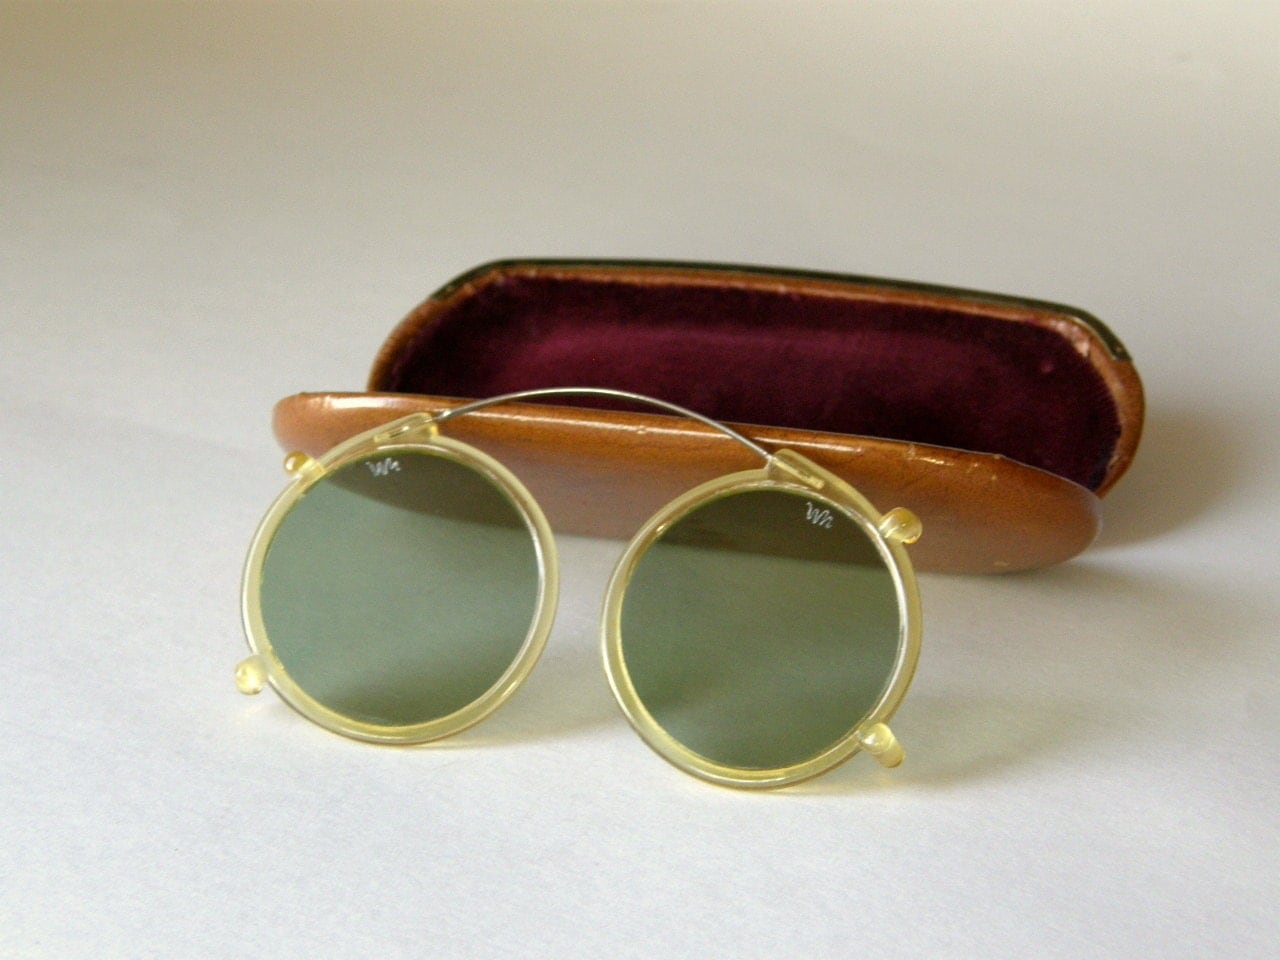 Mens 1930s Round Clip On Sunglasses Engraved Wm 